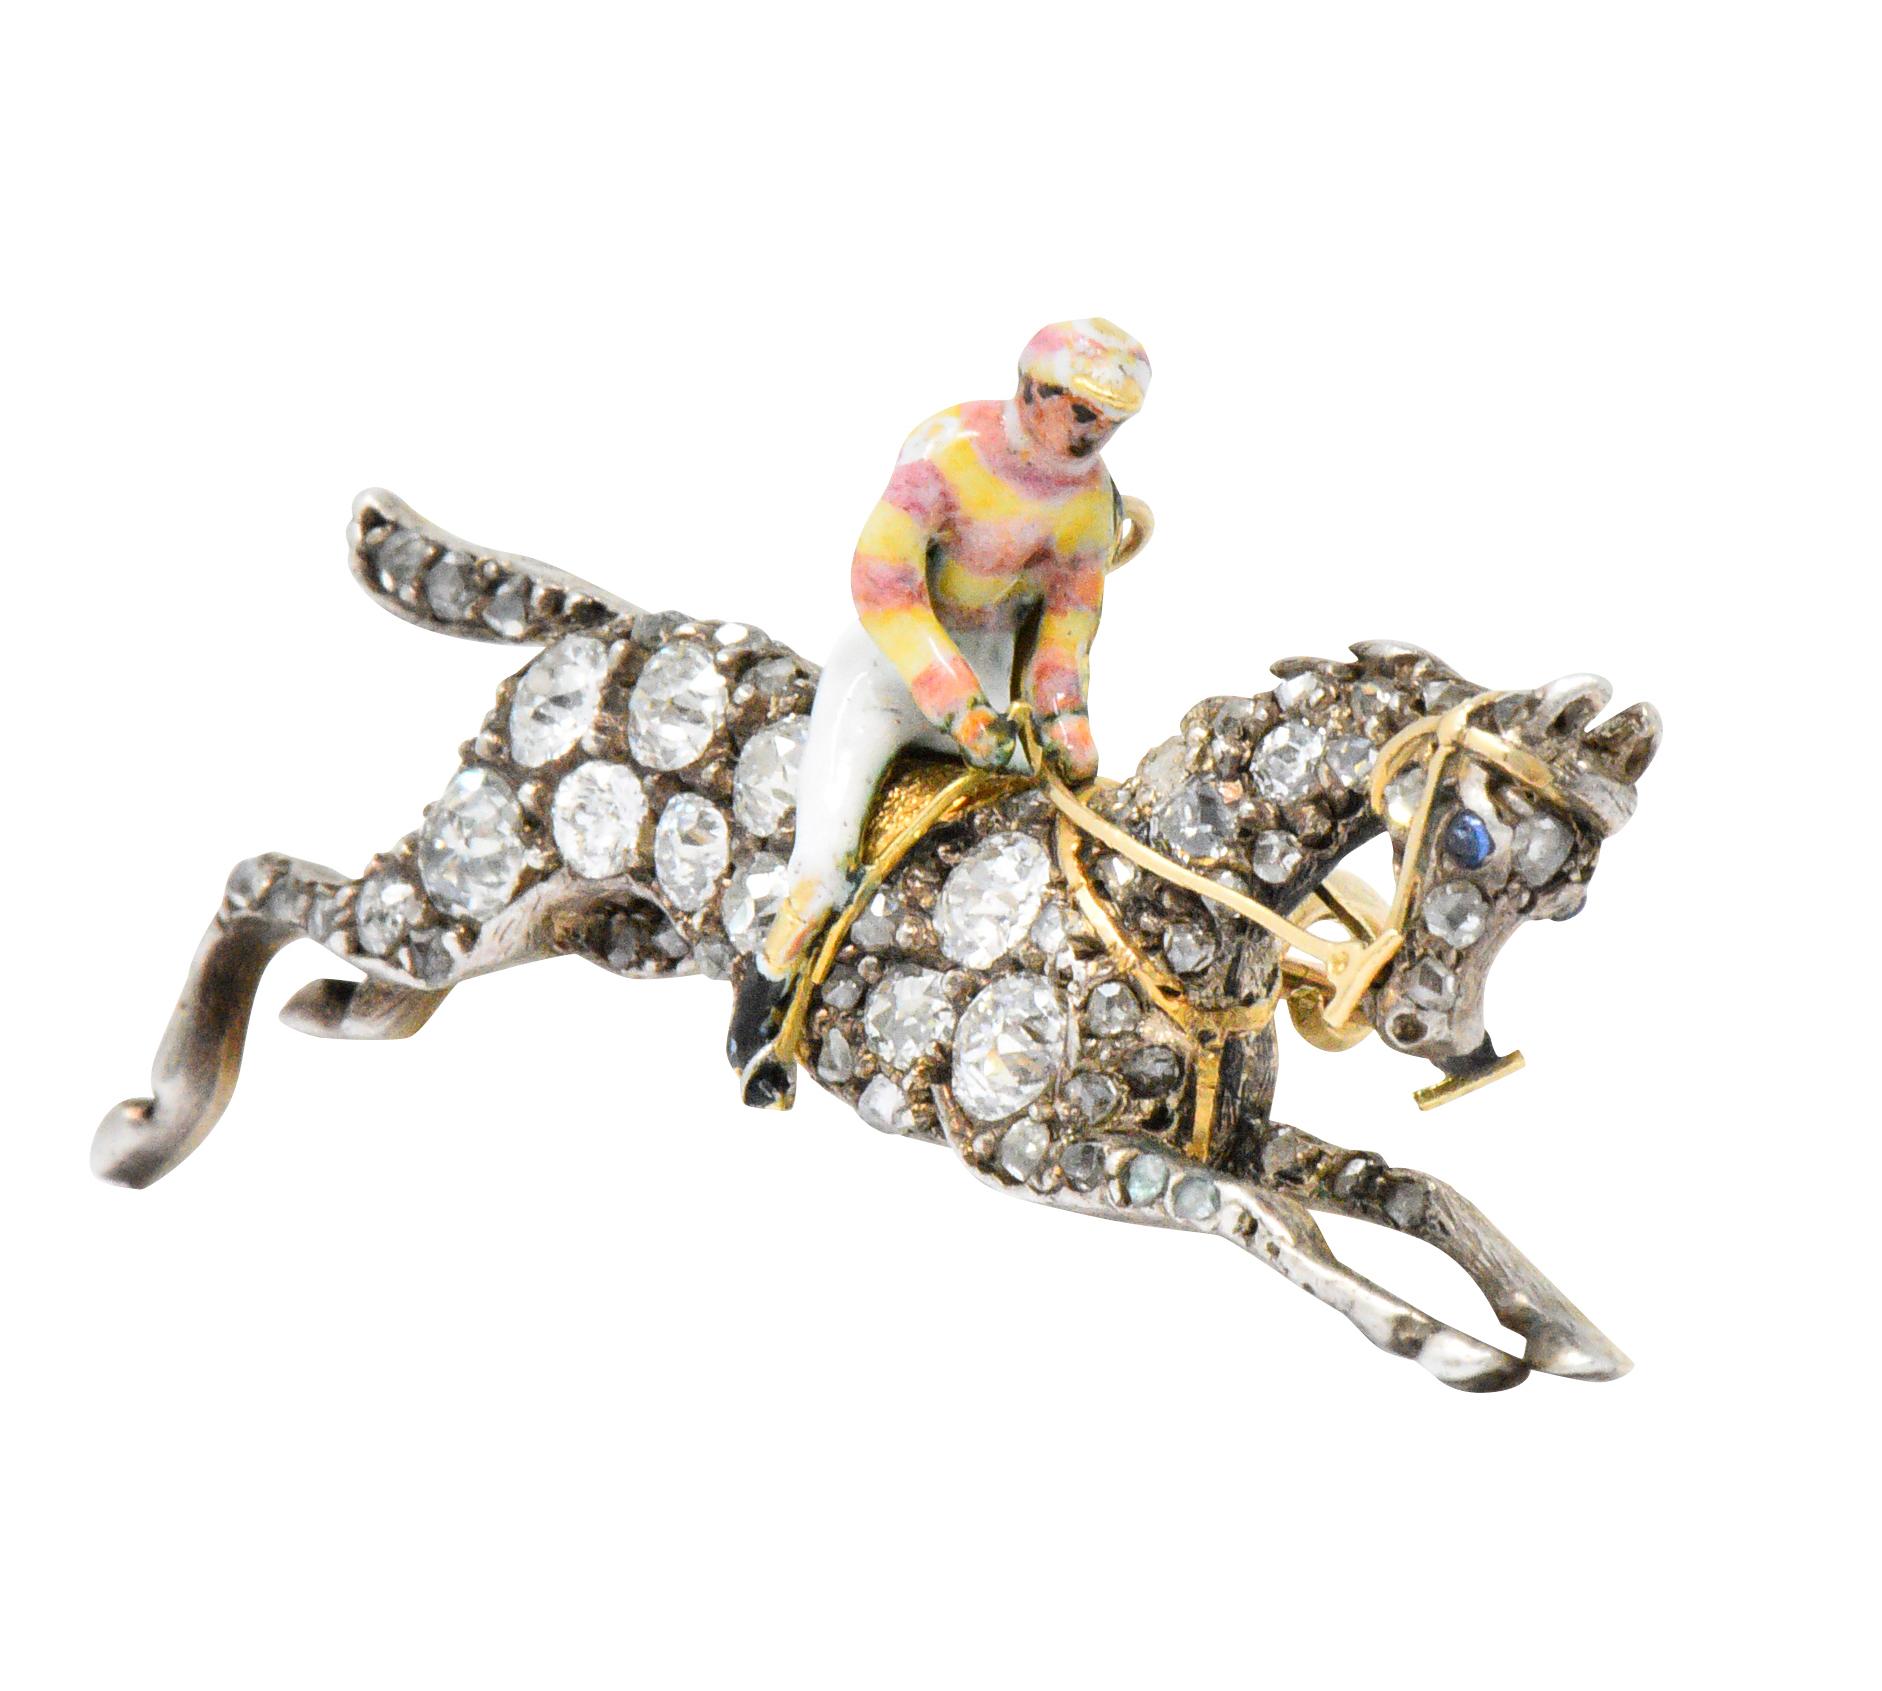 Pendant brooch designed as an enameled jockey figure riding a galloping horse

Set throughout by rose cut diamonds weighing approximately 1.65 carats total

Pastel enamel 